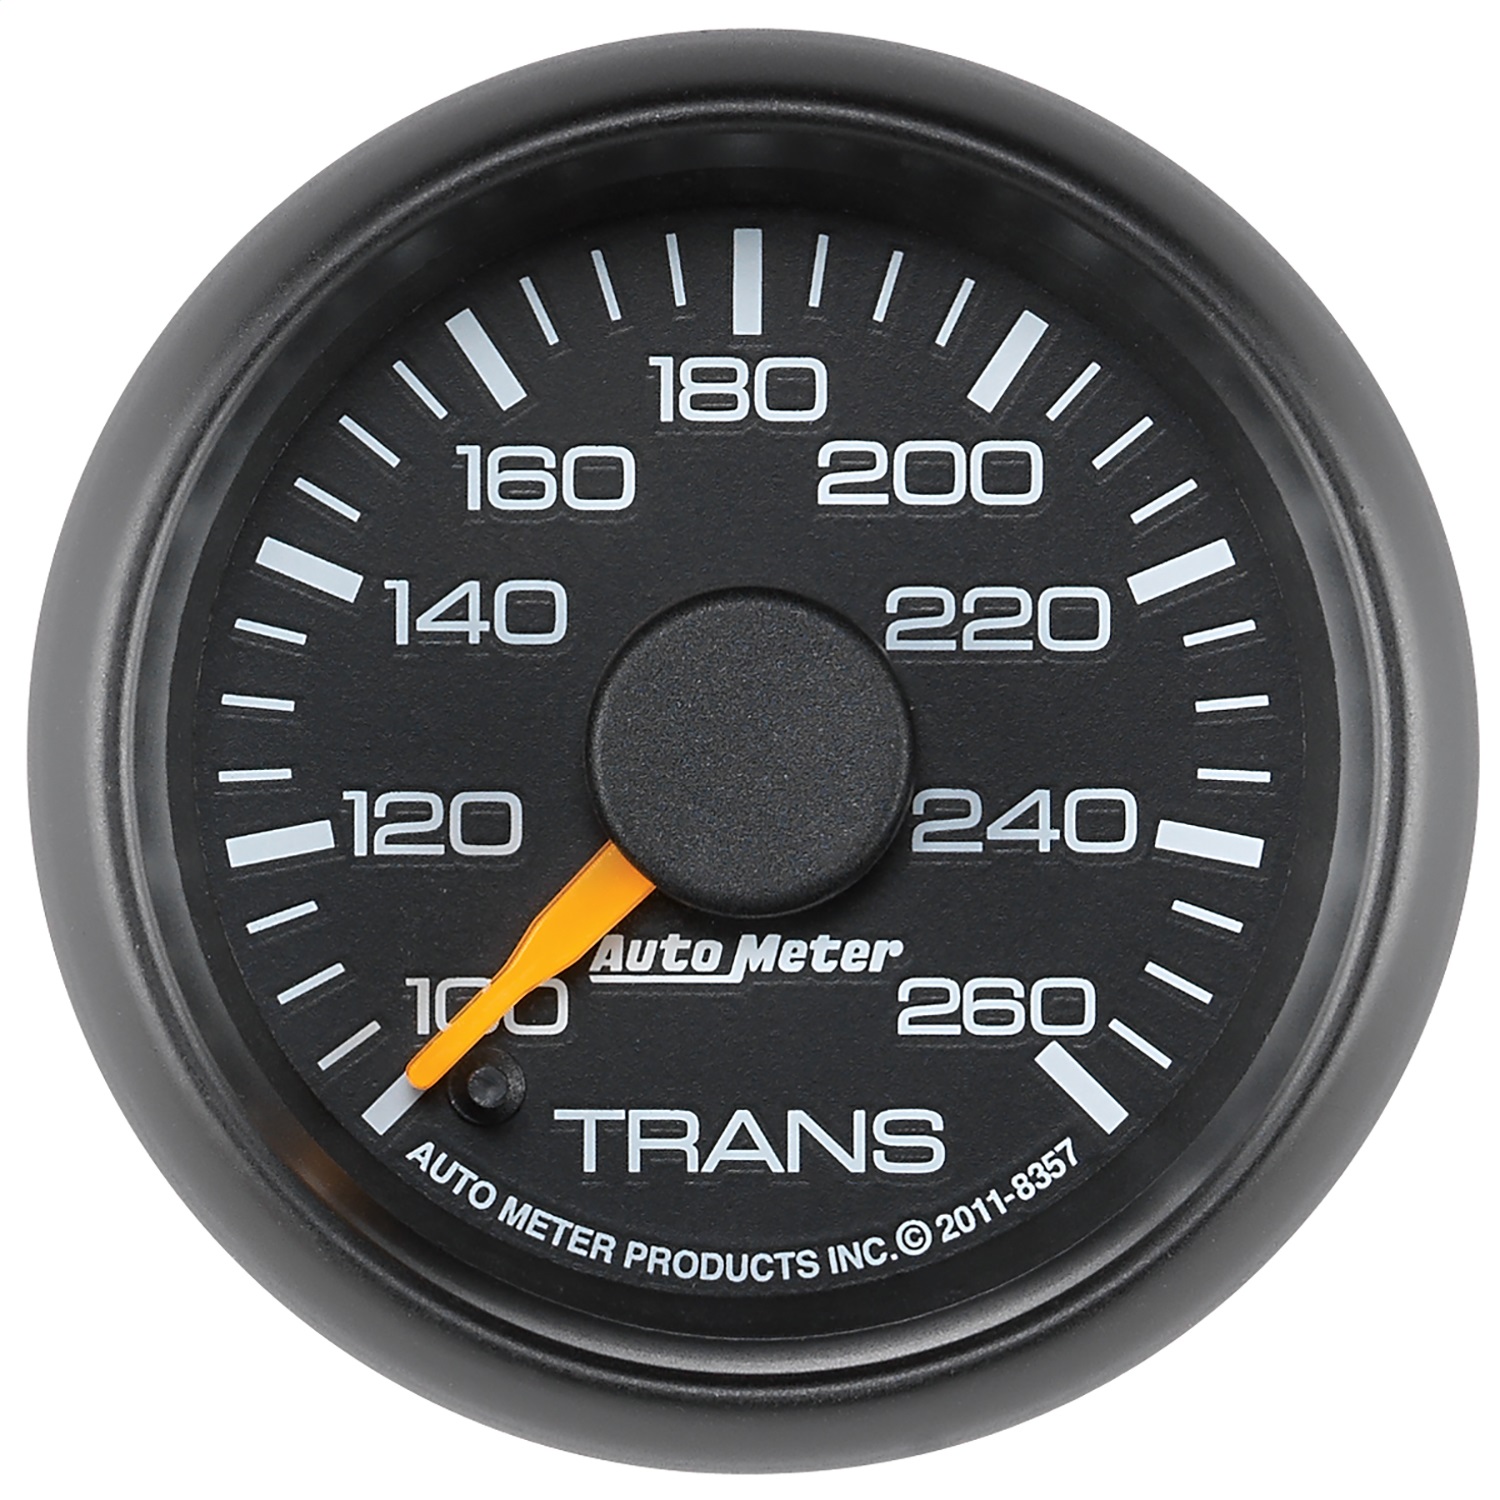 Auto Meter Auto Meter 8357 Chevy Factory Match; Electric Transmission Temperature Gauge